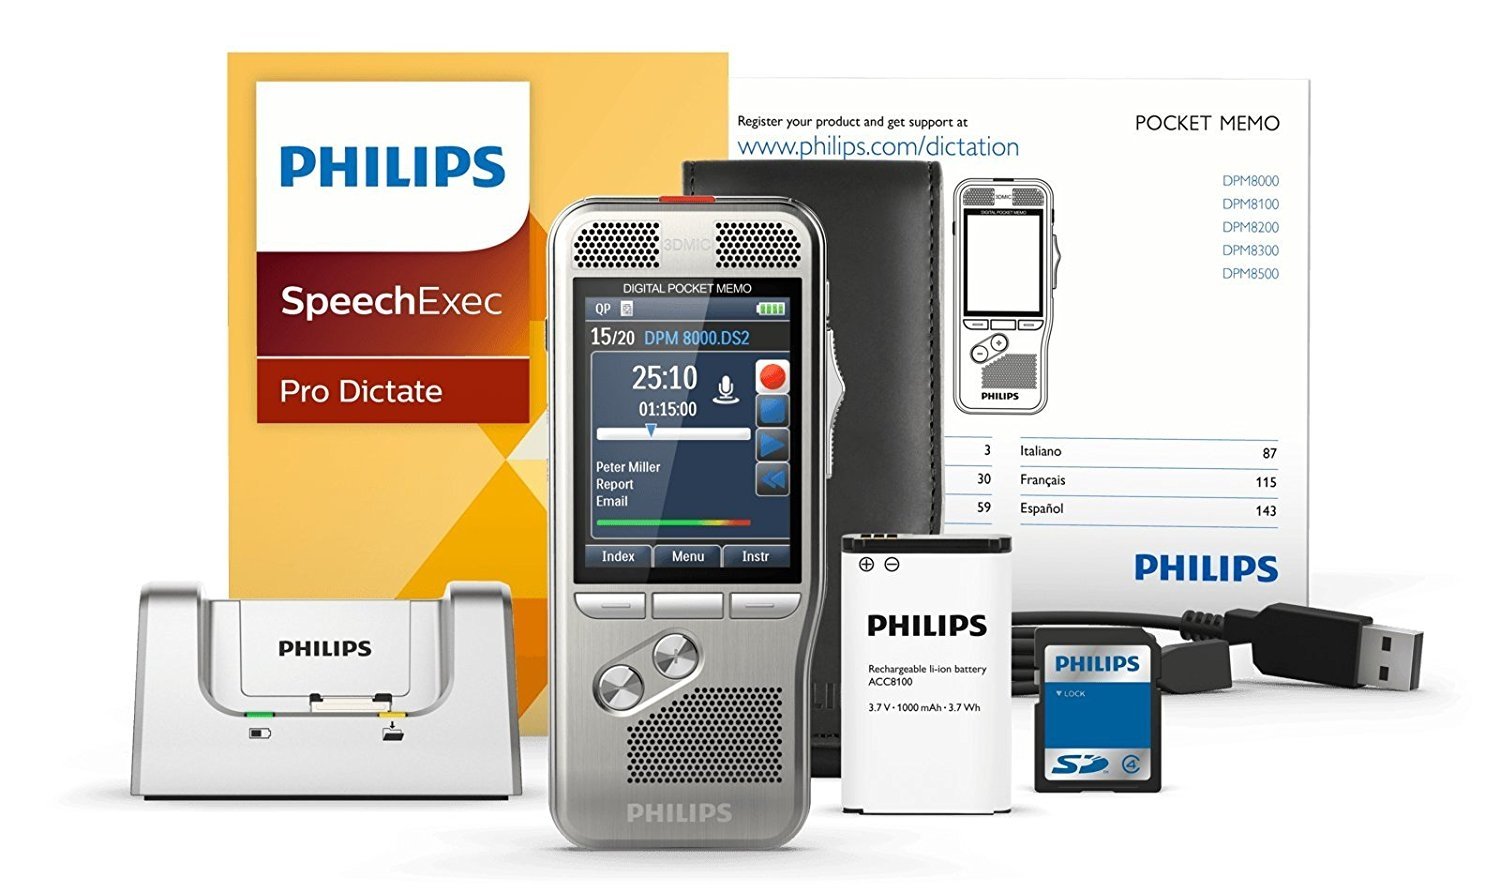 Philips DPM-8000 Professional Digital Pocket Memo with Cradle and Speechexec Pro Software - image 2 of 8